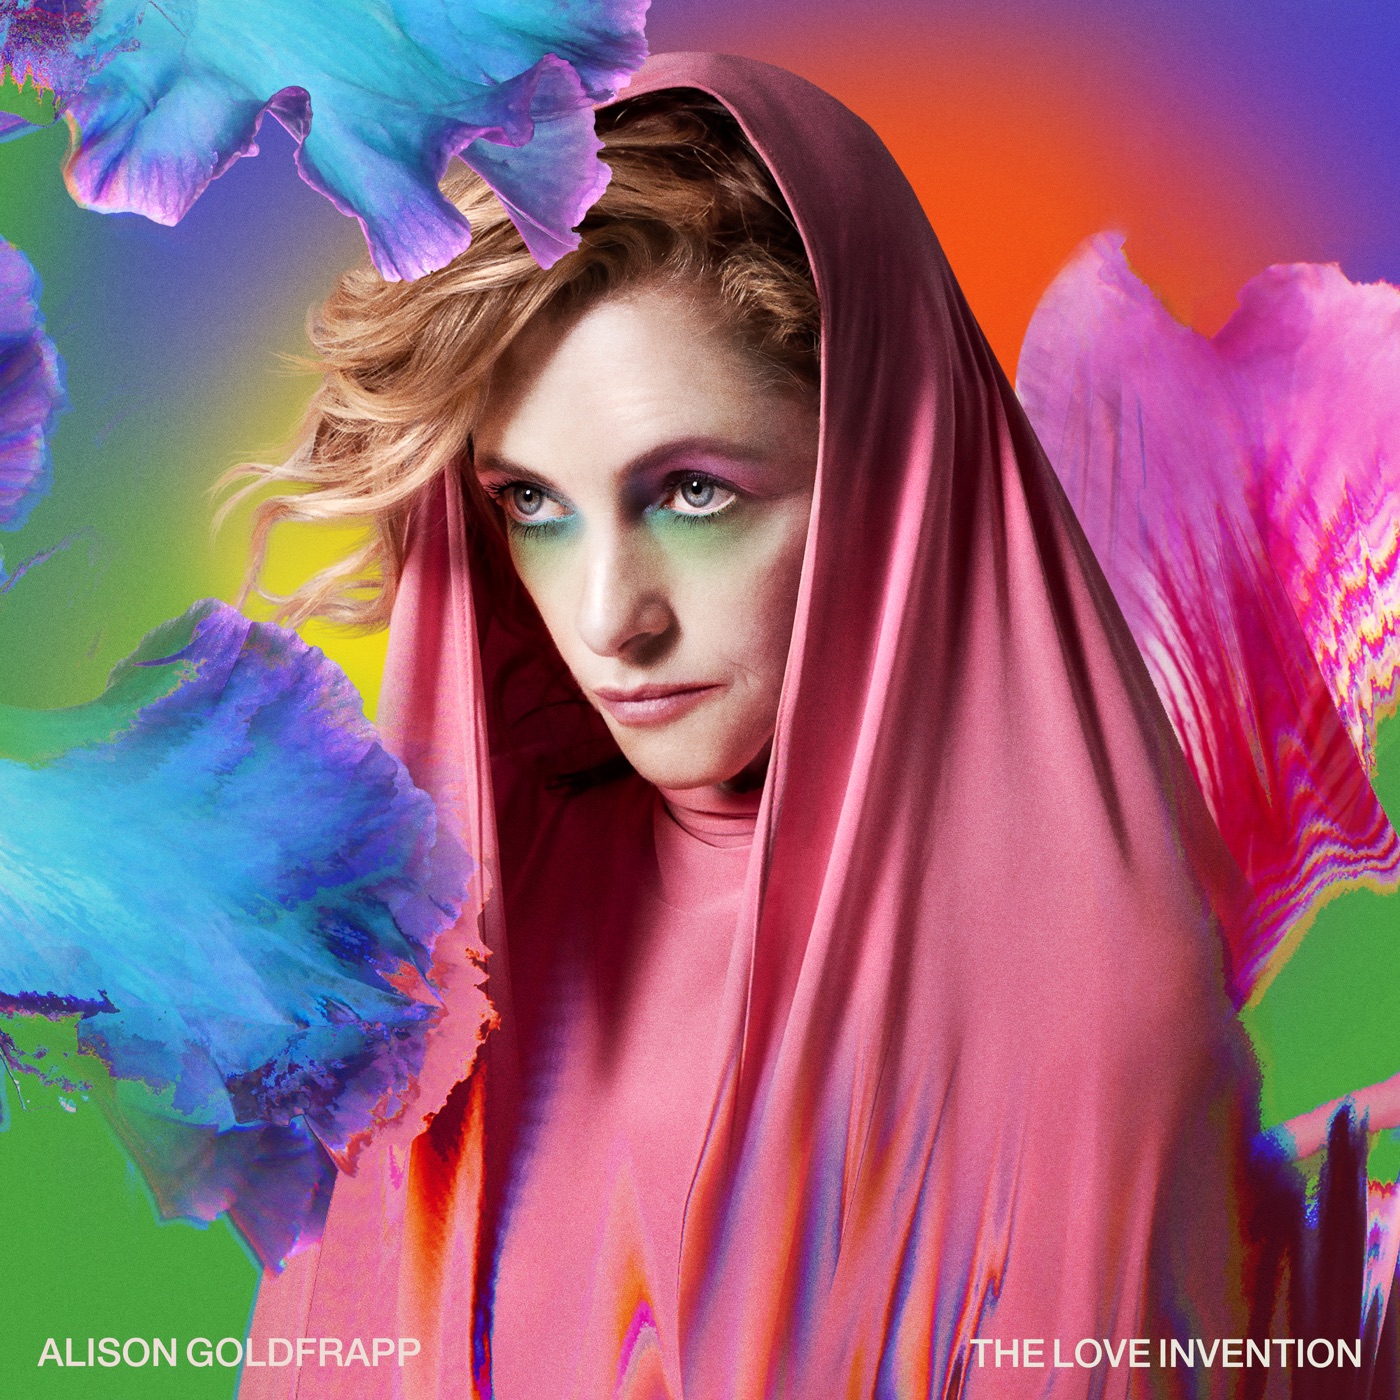 The Love Invention by Alison Goldfrapp